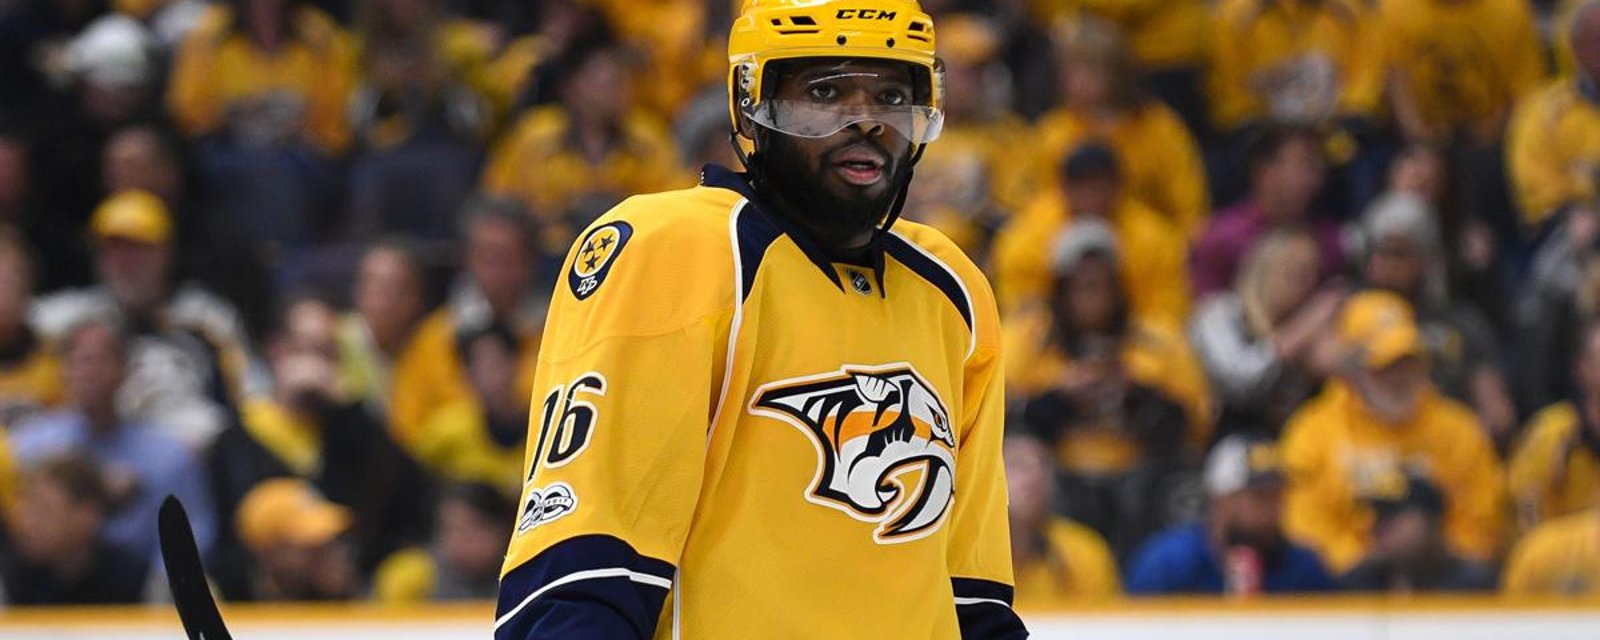 MUST SEE : P.K. Subban warmup routine will mesmerize you! 